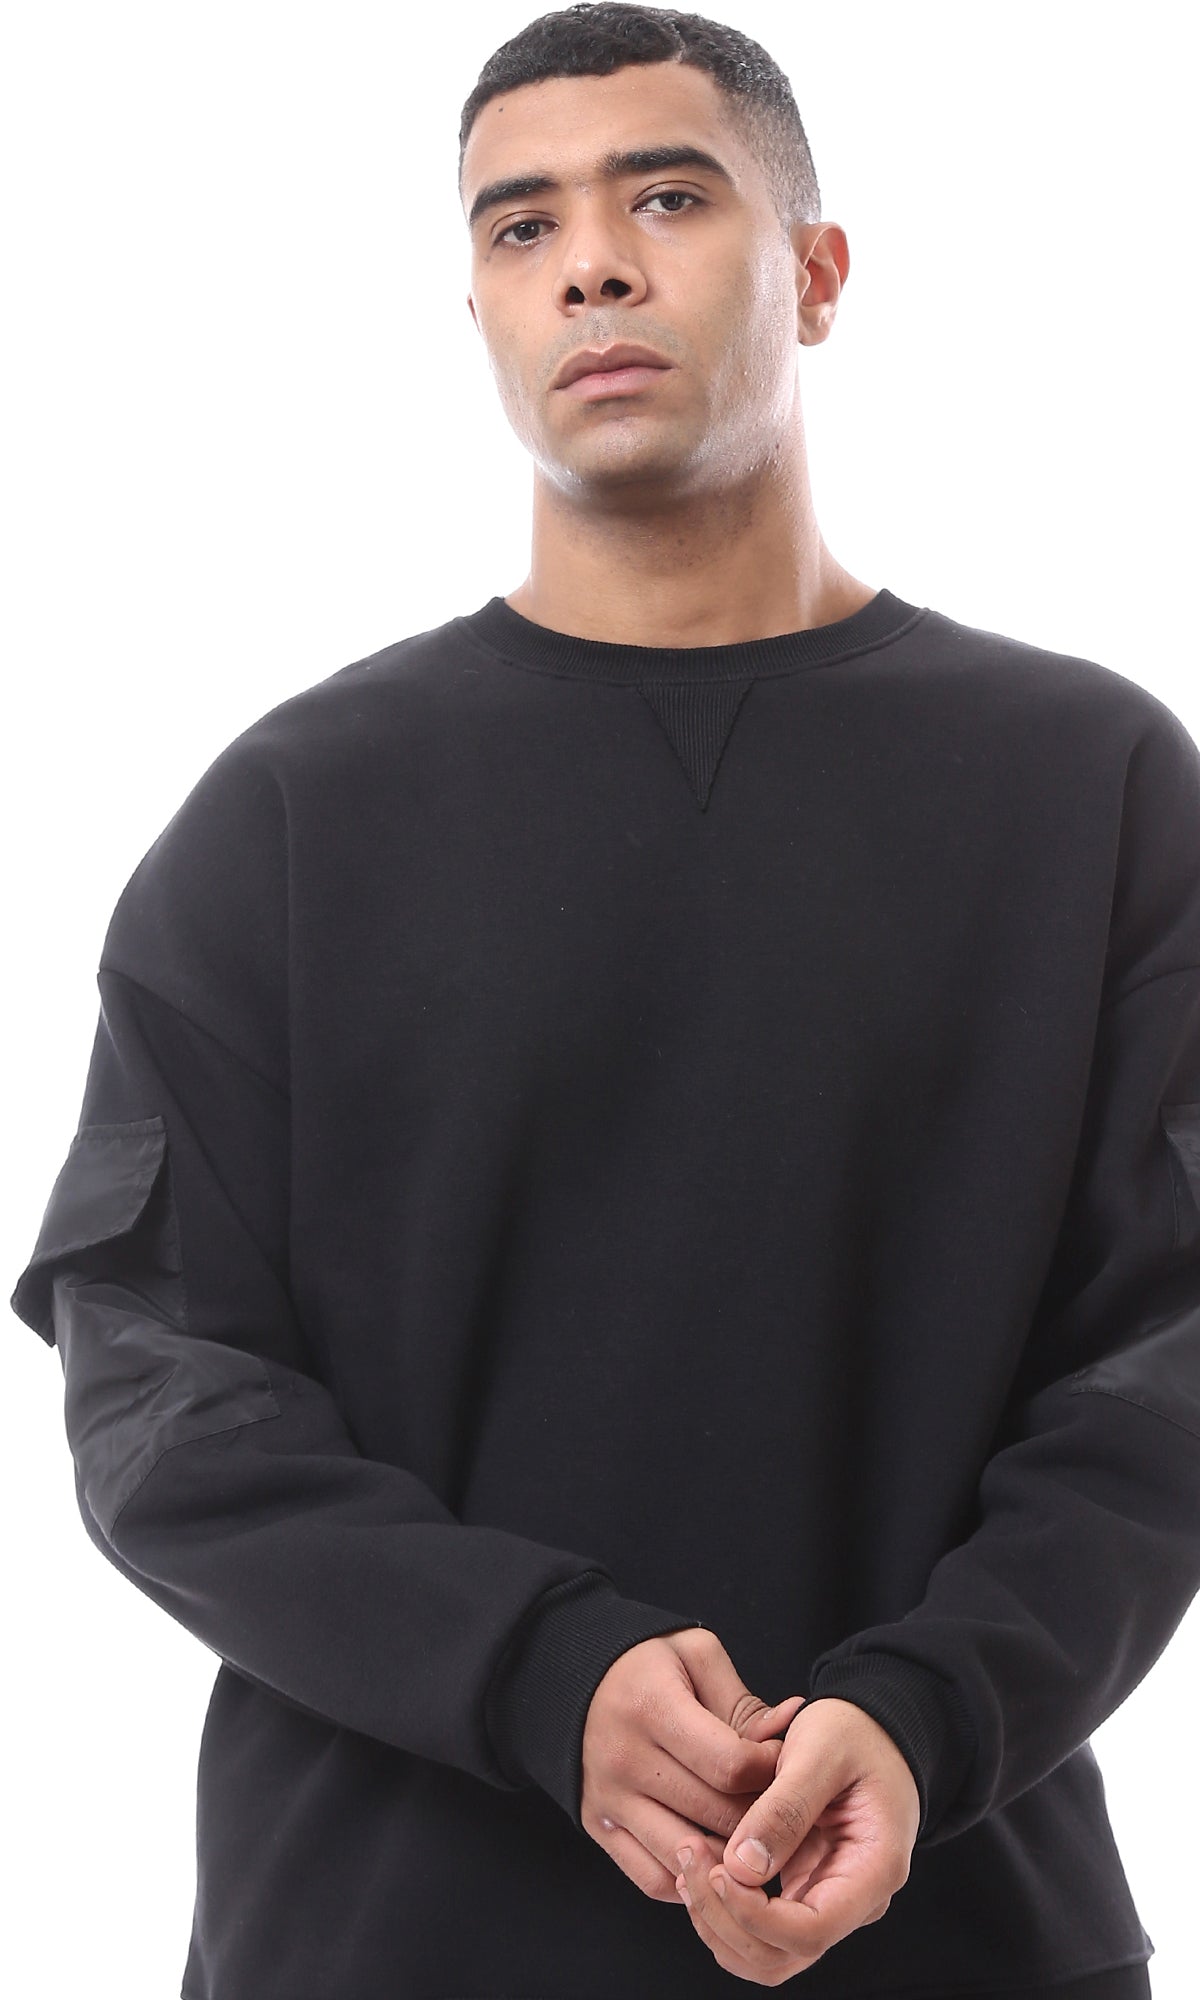 O175782 Black Sweatshirt With Patched Pockets On Sleeves